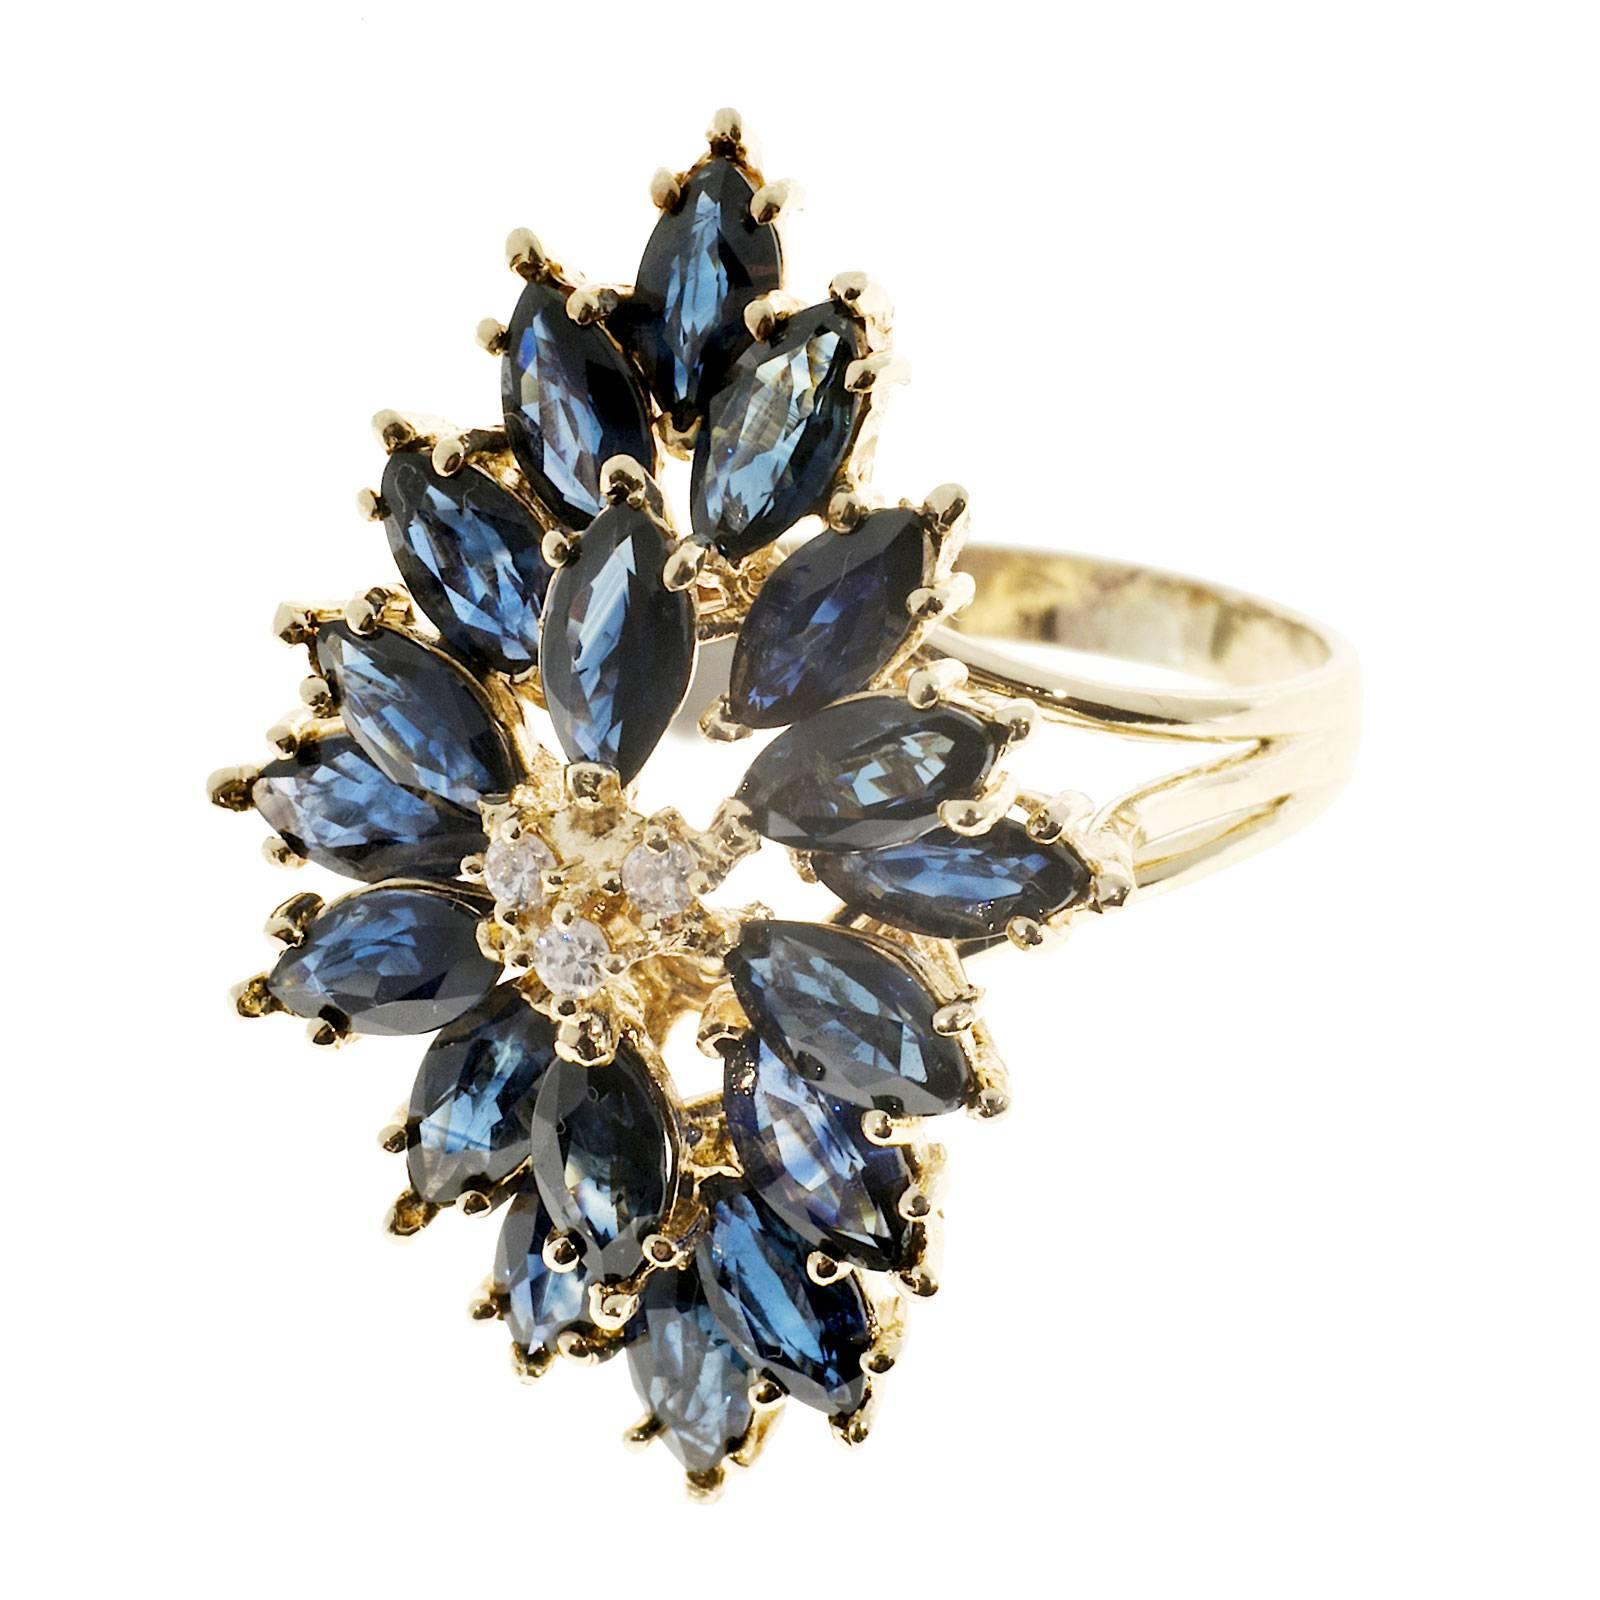 Large handmade 14k gold wire constructed Sapphire and diamond ring. Bright deep blue genuine Sapphires.

3 full cut diamonds approx. total weight .05cts, G, VS
18 genuine Marquise Sapphires 6 x 3mm, approx. total weight 6.00cts
14k Yellow